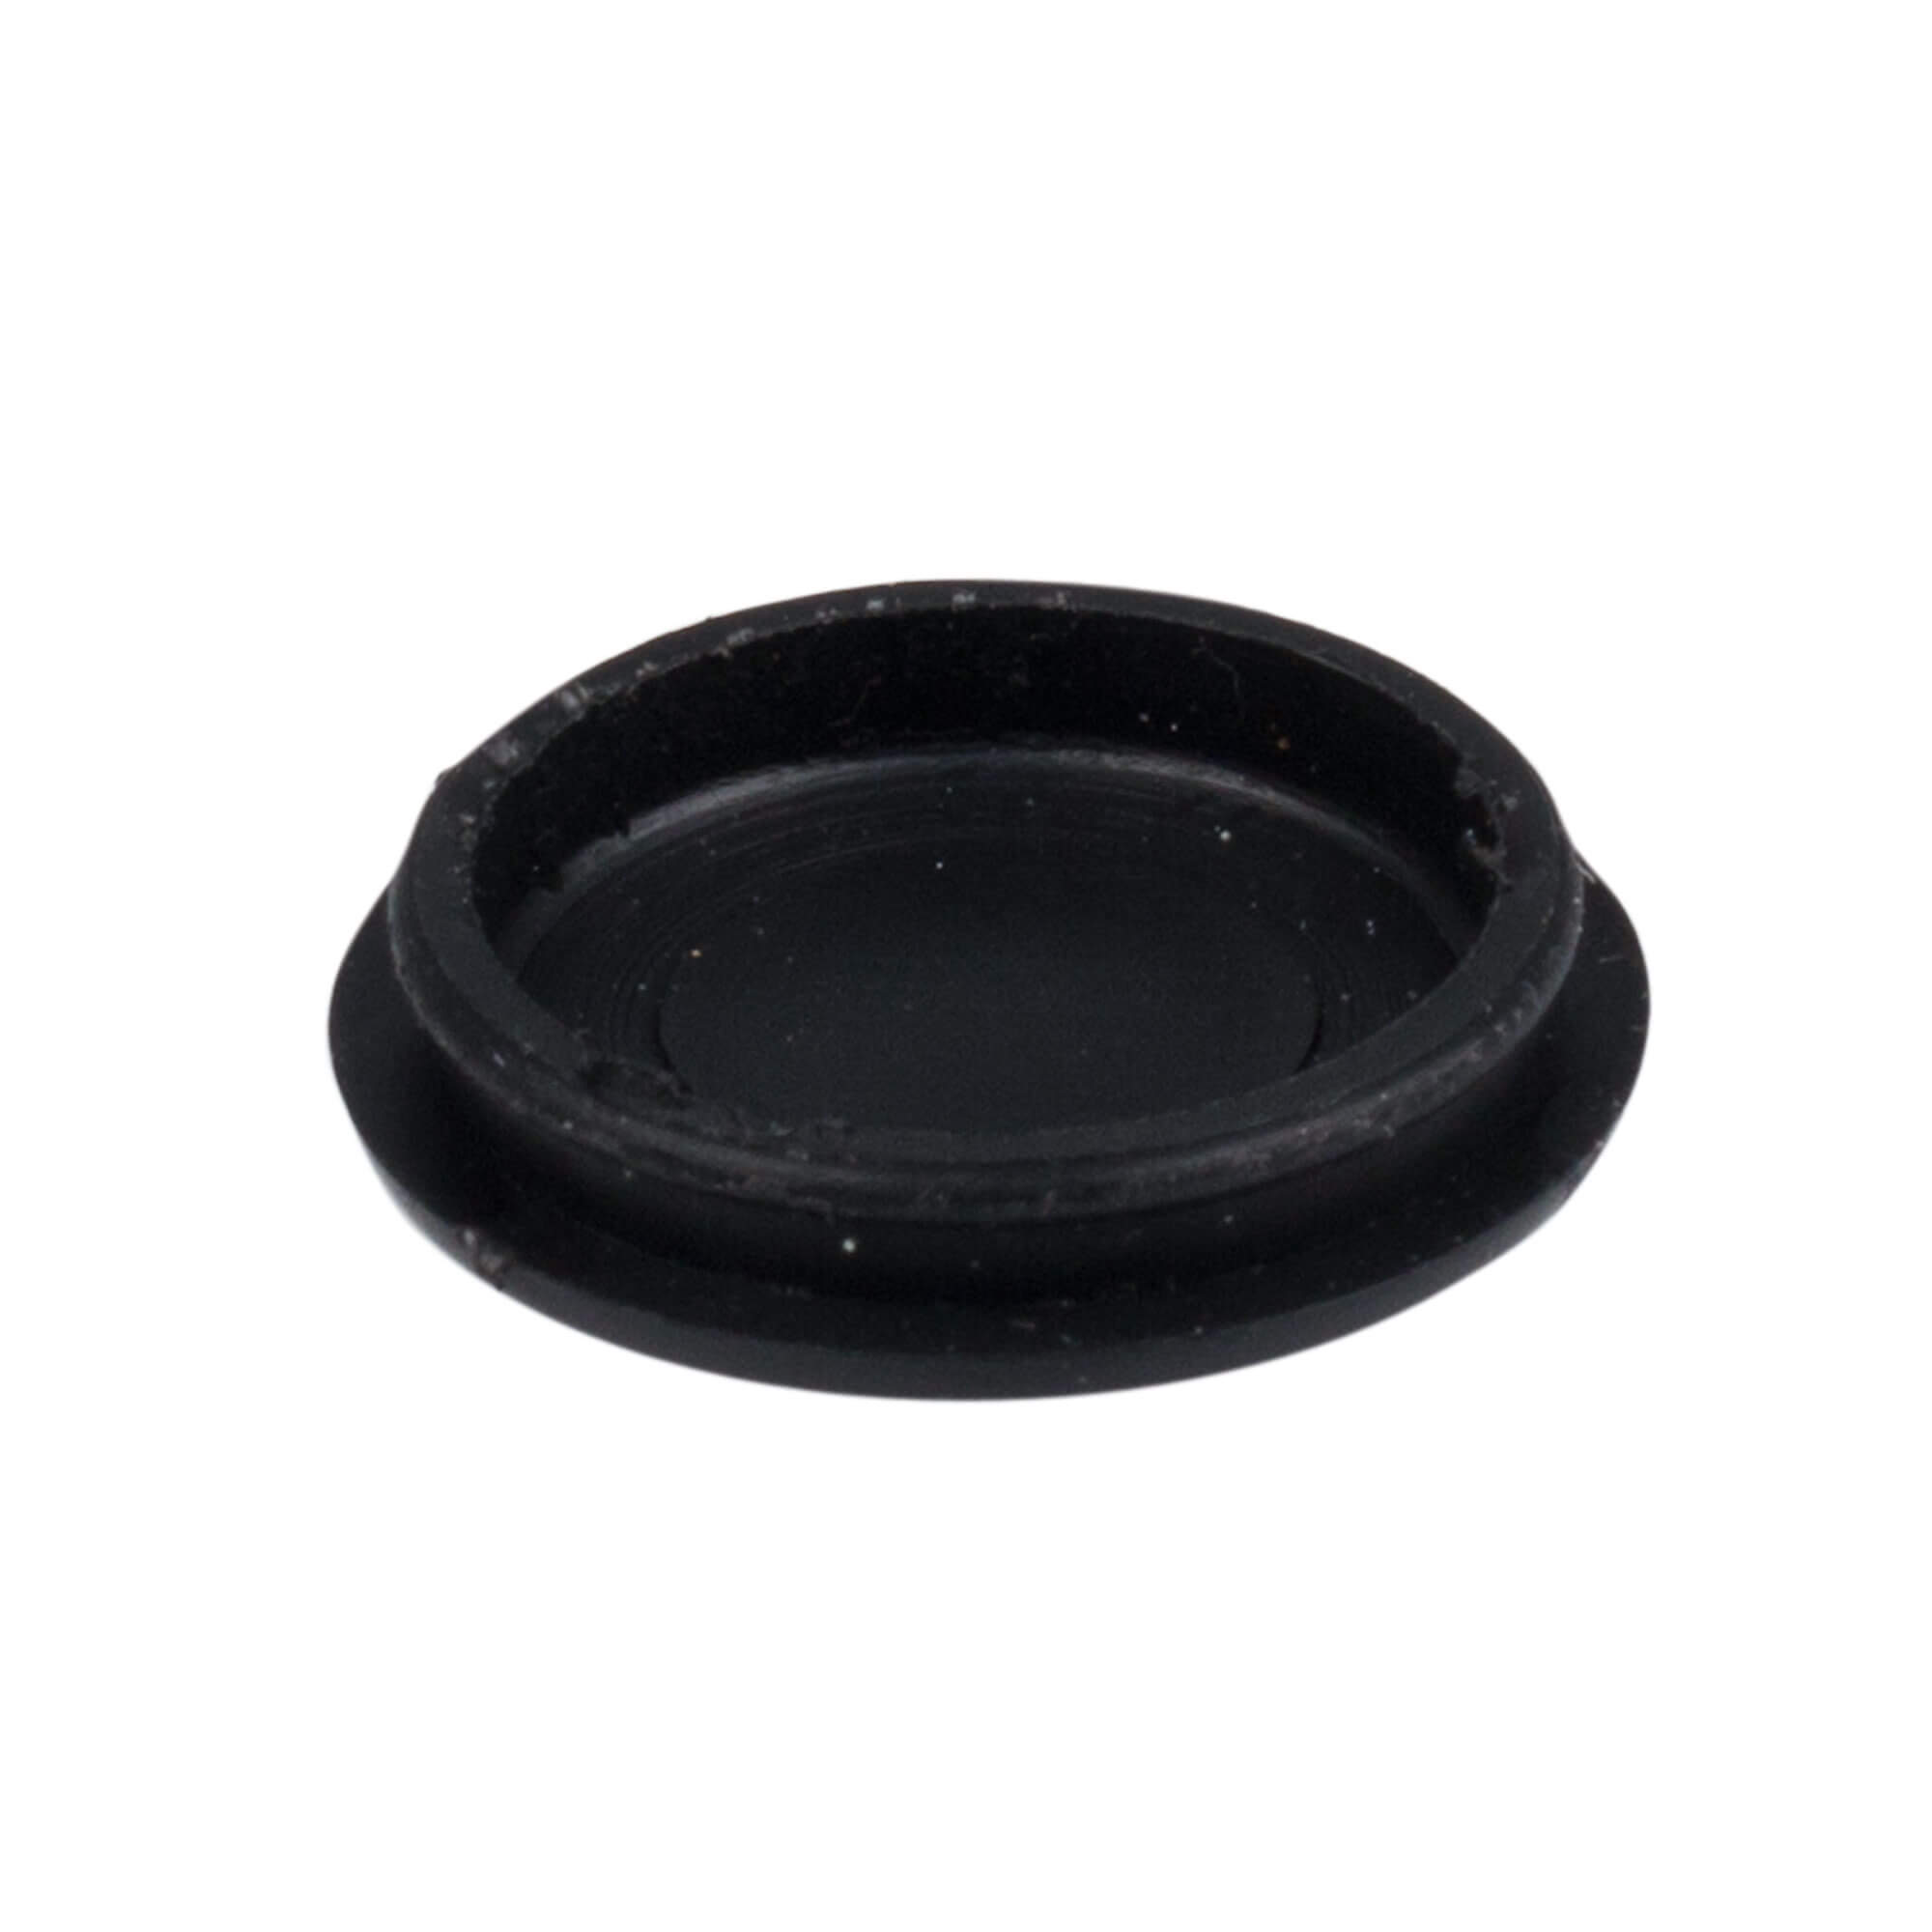 Gear stopper - spare part for Cancan manual juicer